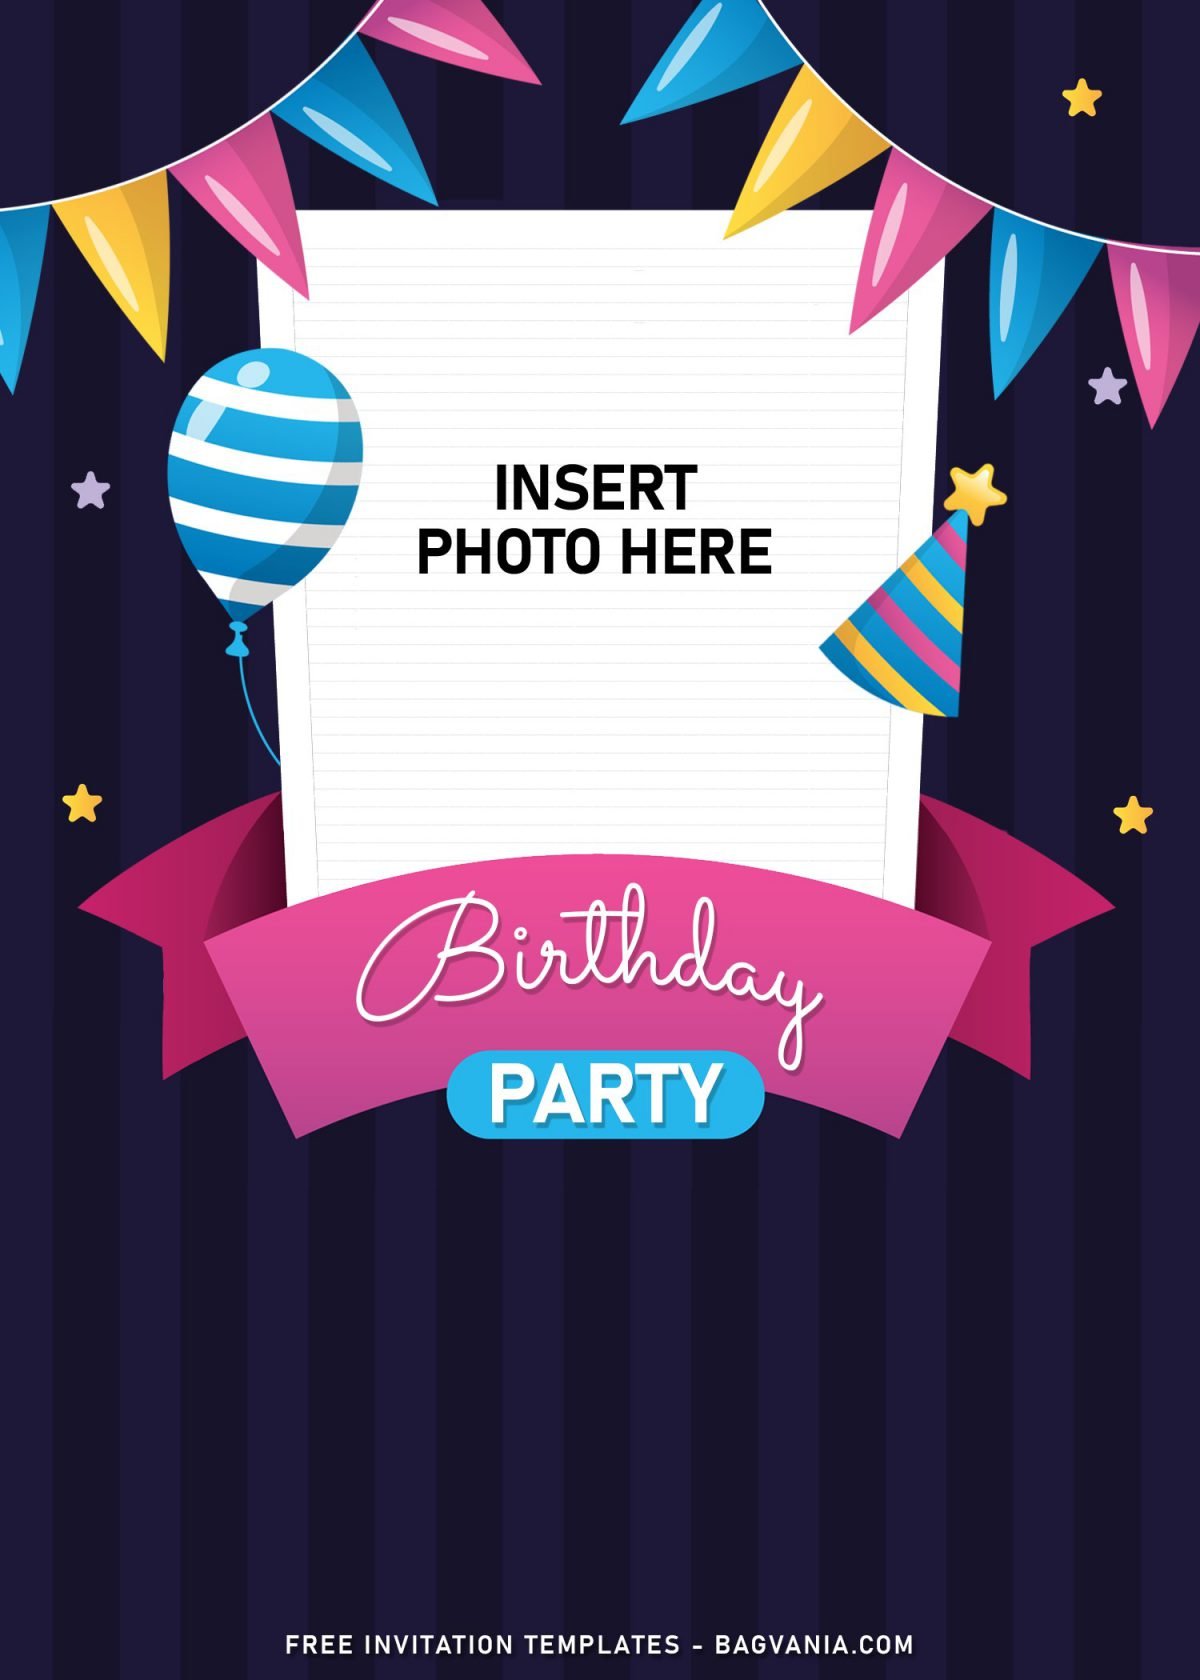 11+ Fun Birthday Invitation Templates For Your Kid’s Upcoming Birthday Party and has cute blue balloons